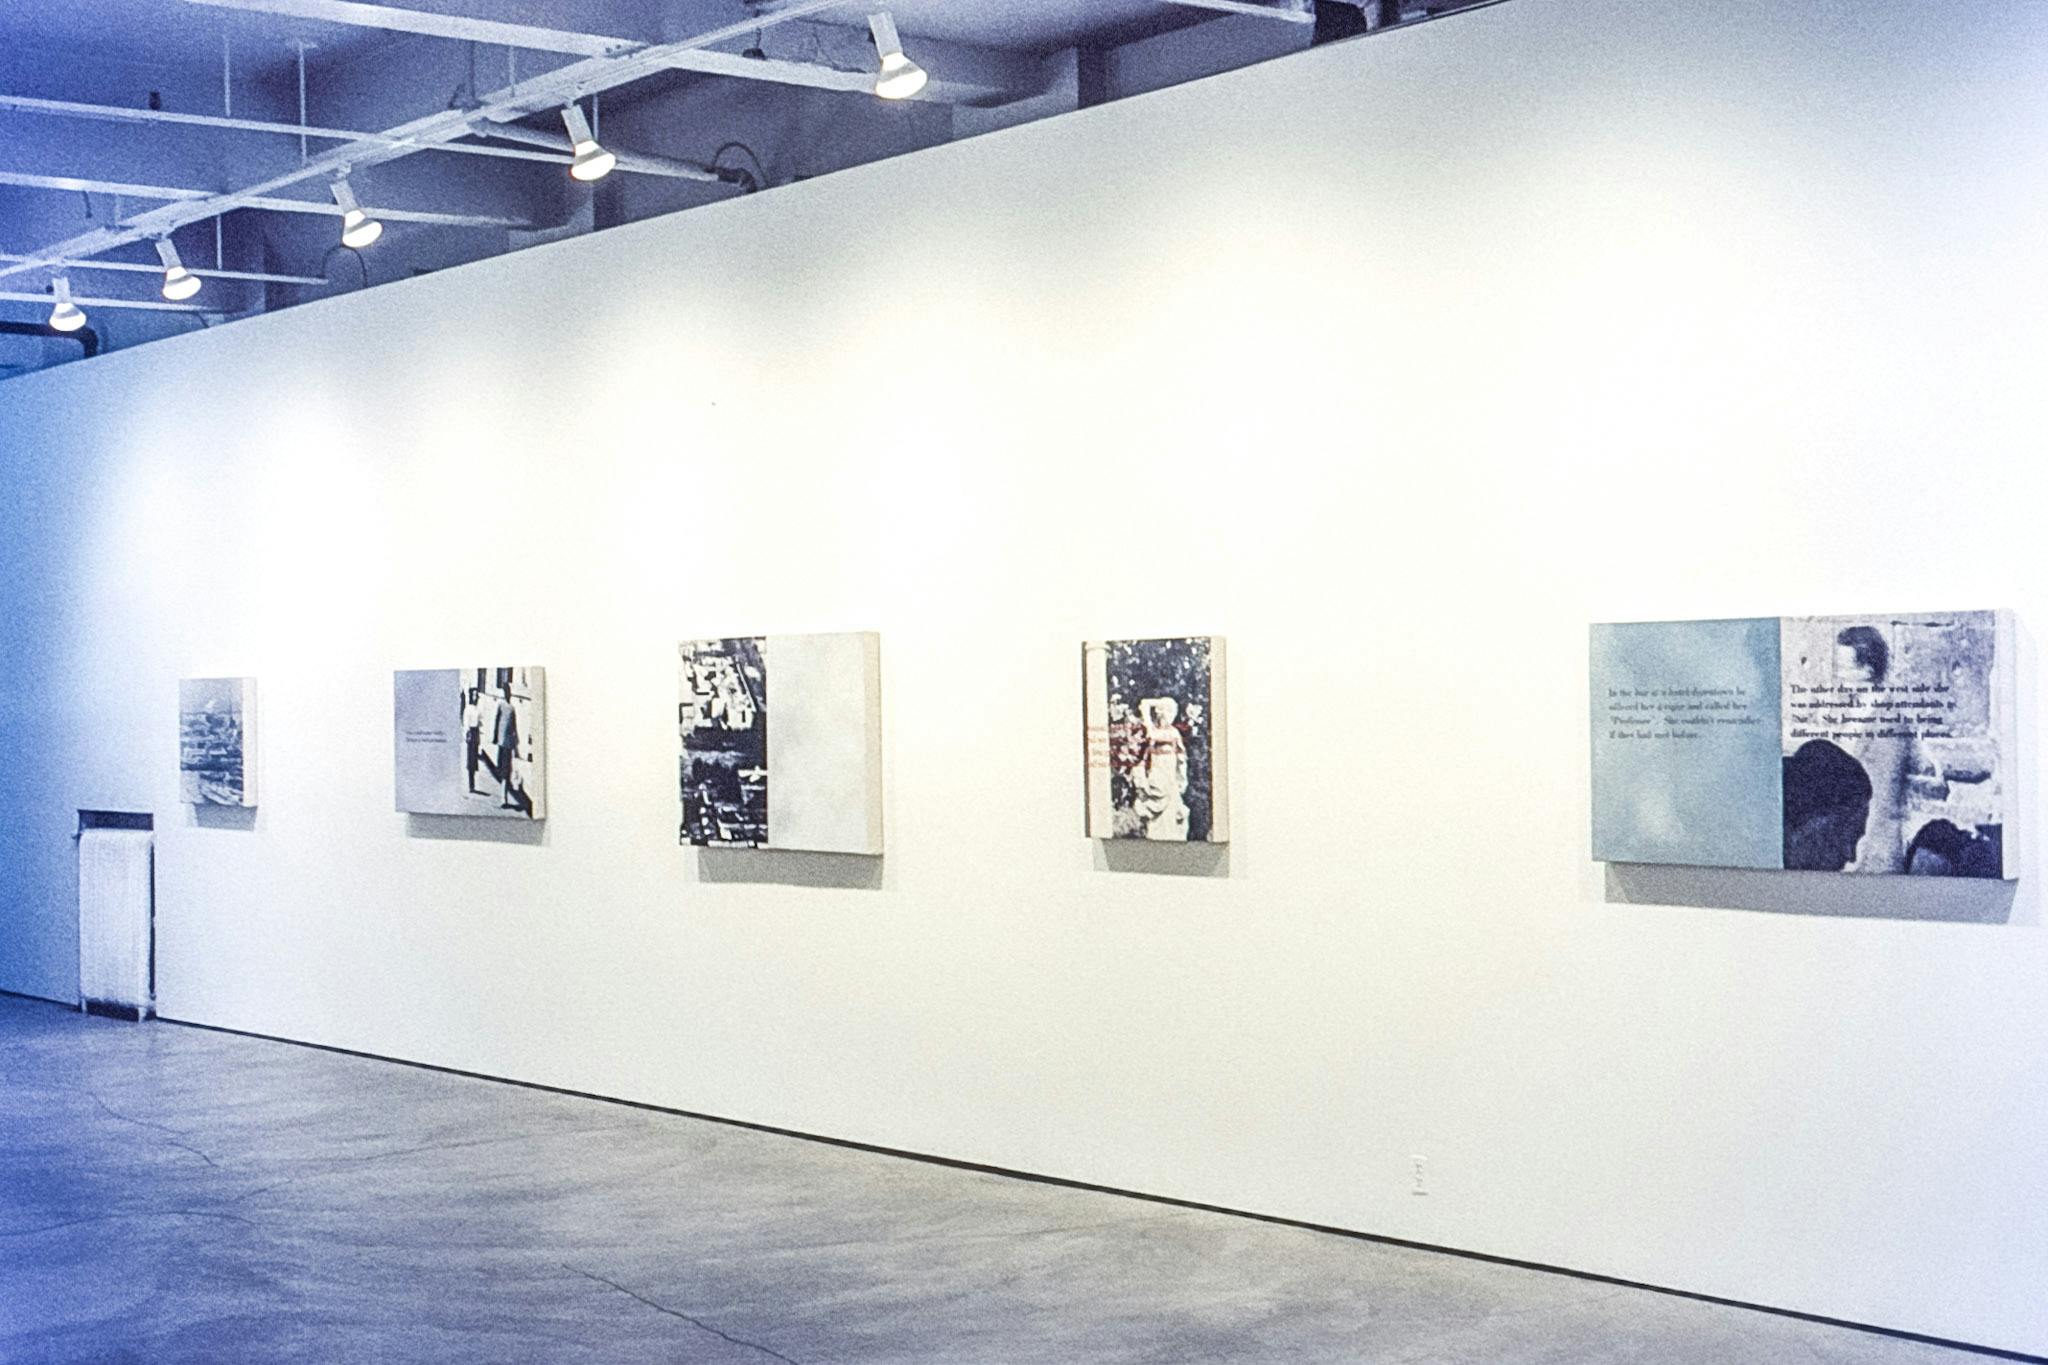 Five artworks mounted on the gallery wall. Each of them has a black and white photograph of people or a cityscape accompanied by texts, either in black or red, written beside or over the photograph.